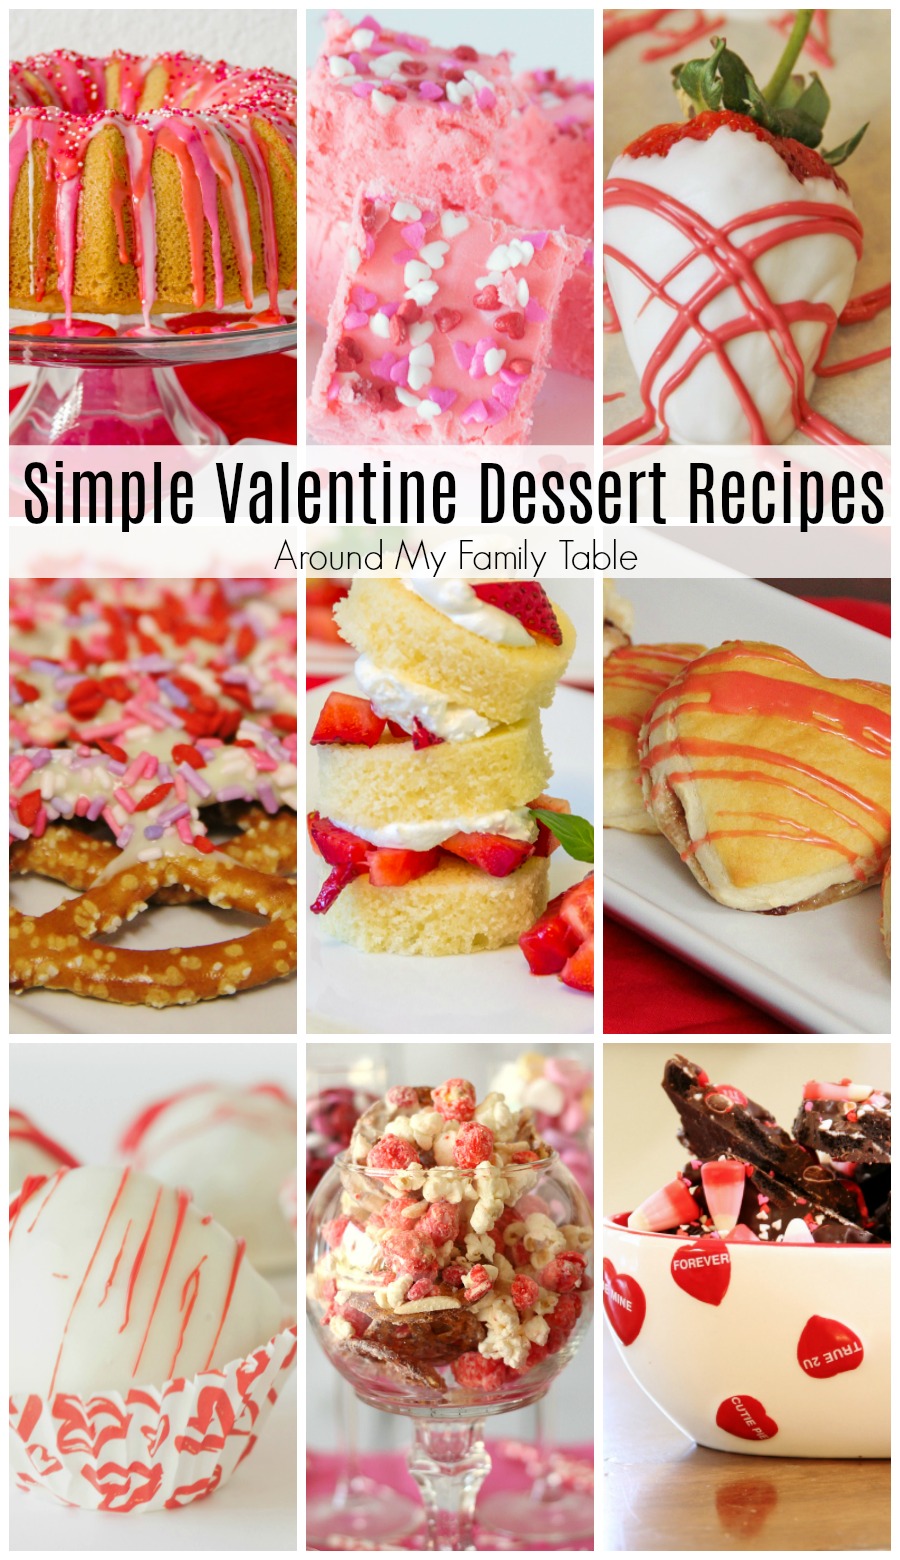 Valentine’s Day is right around the corner and this list of Simple Valentine Dessert Recipes is sure to have the perfect treat to share with your hunny.  